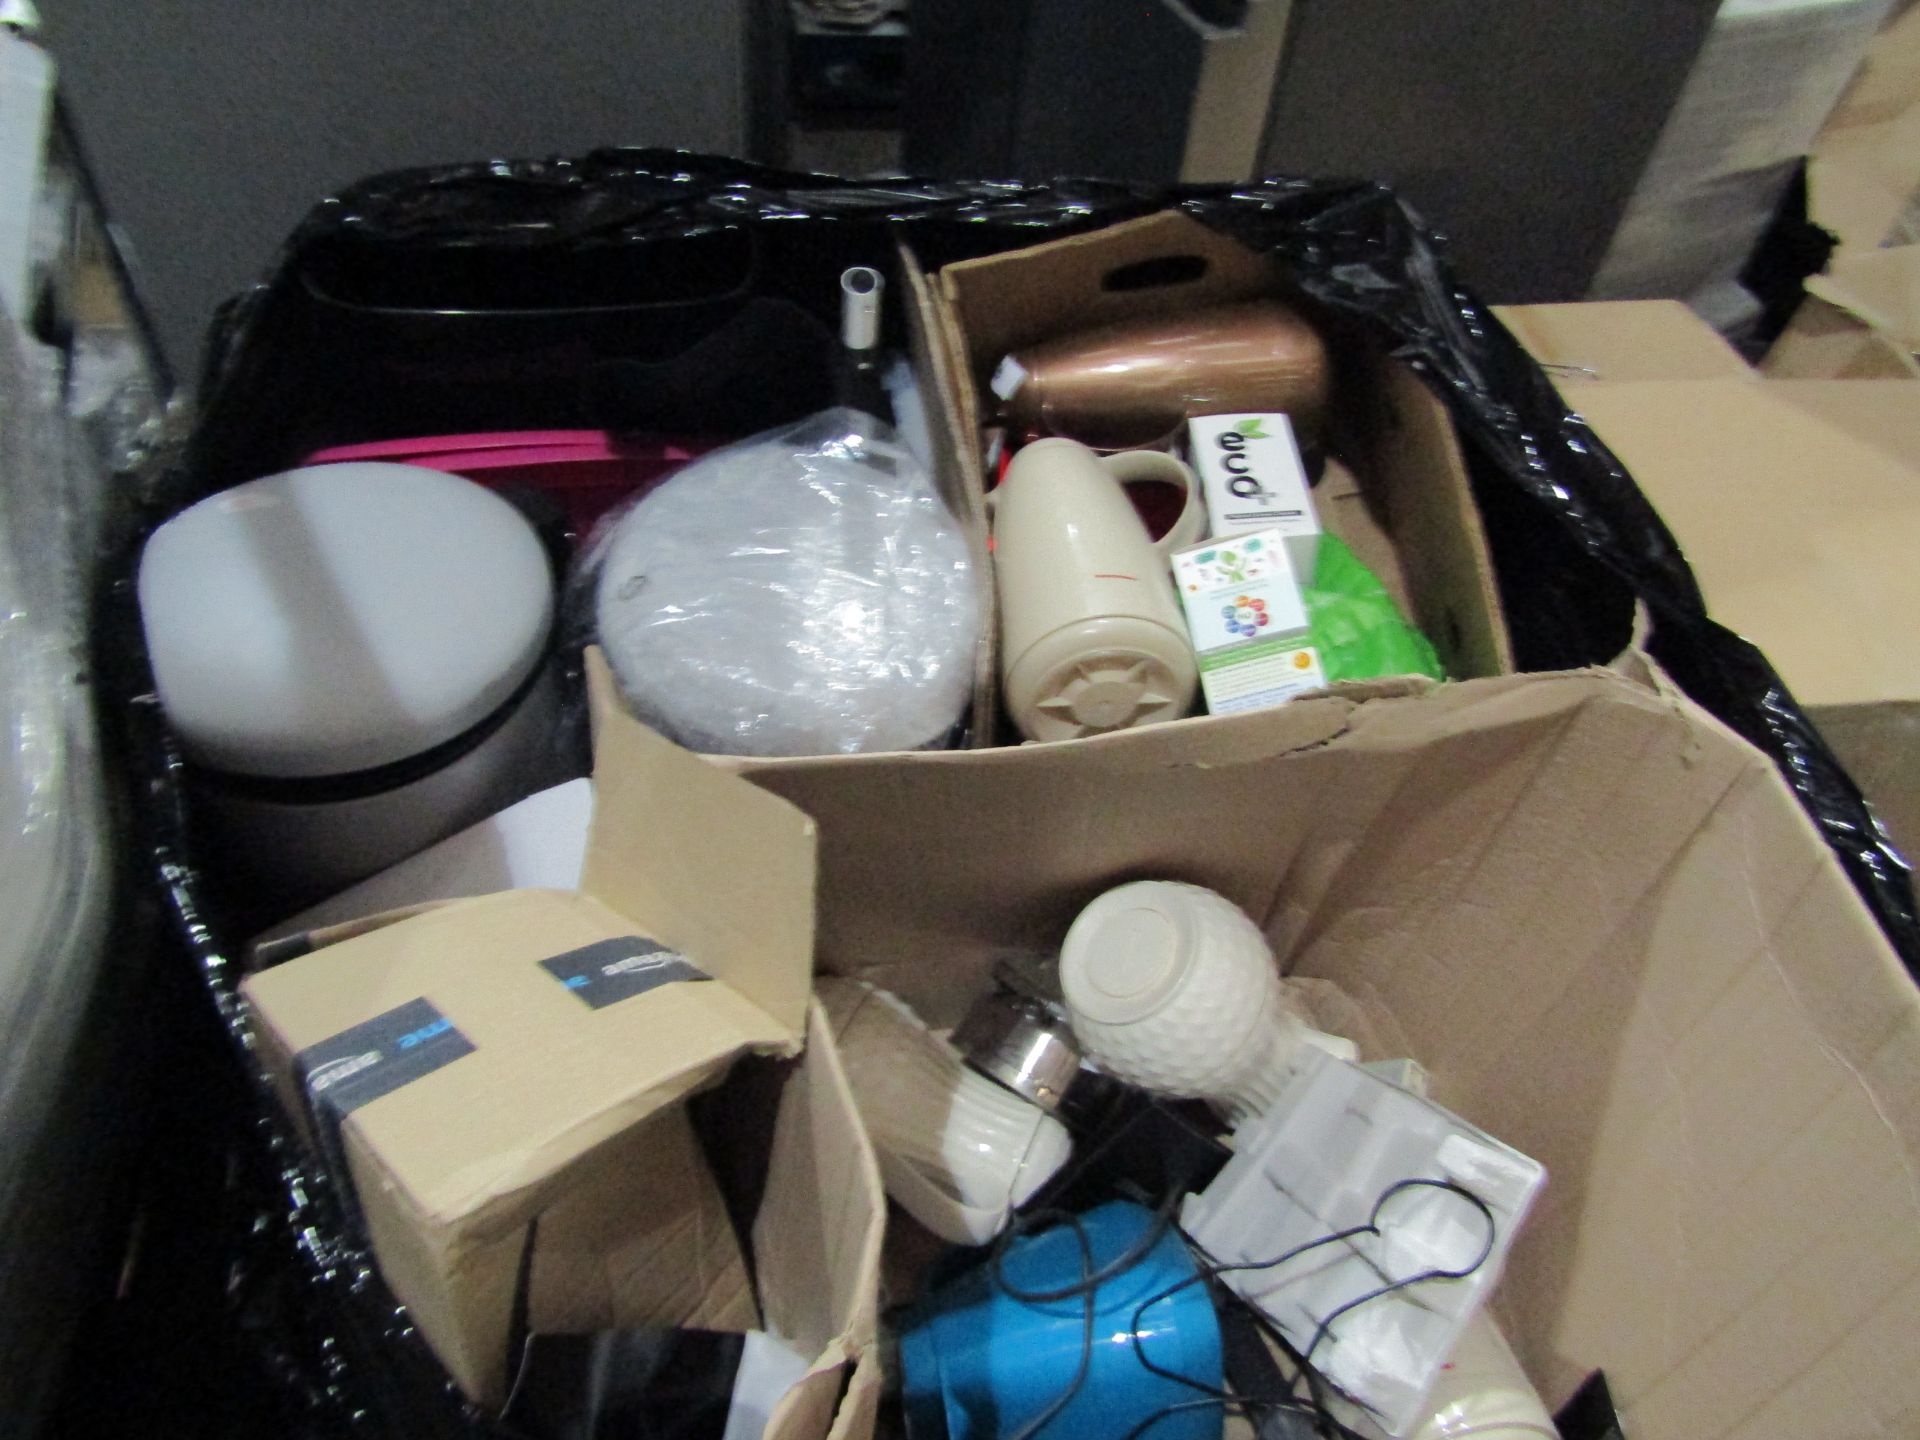 1 Pallet of Mixed unmanifested Goods Being Kitchen bins, Electrical items & kitchenware. All